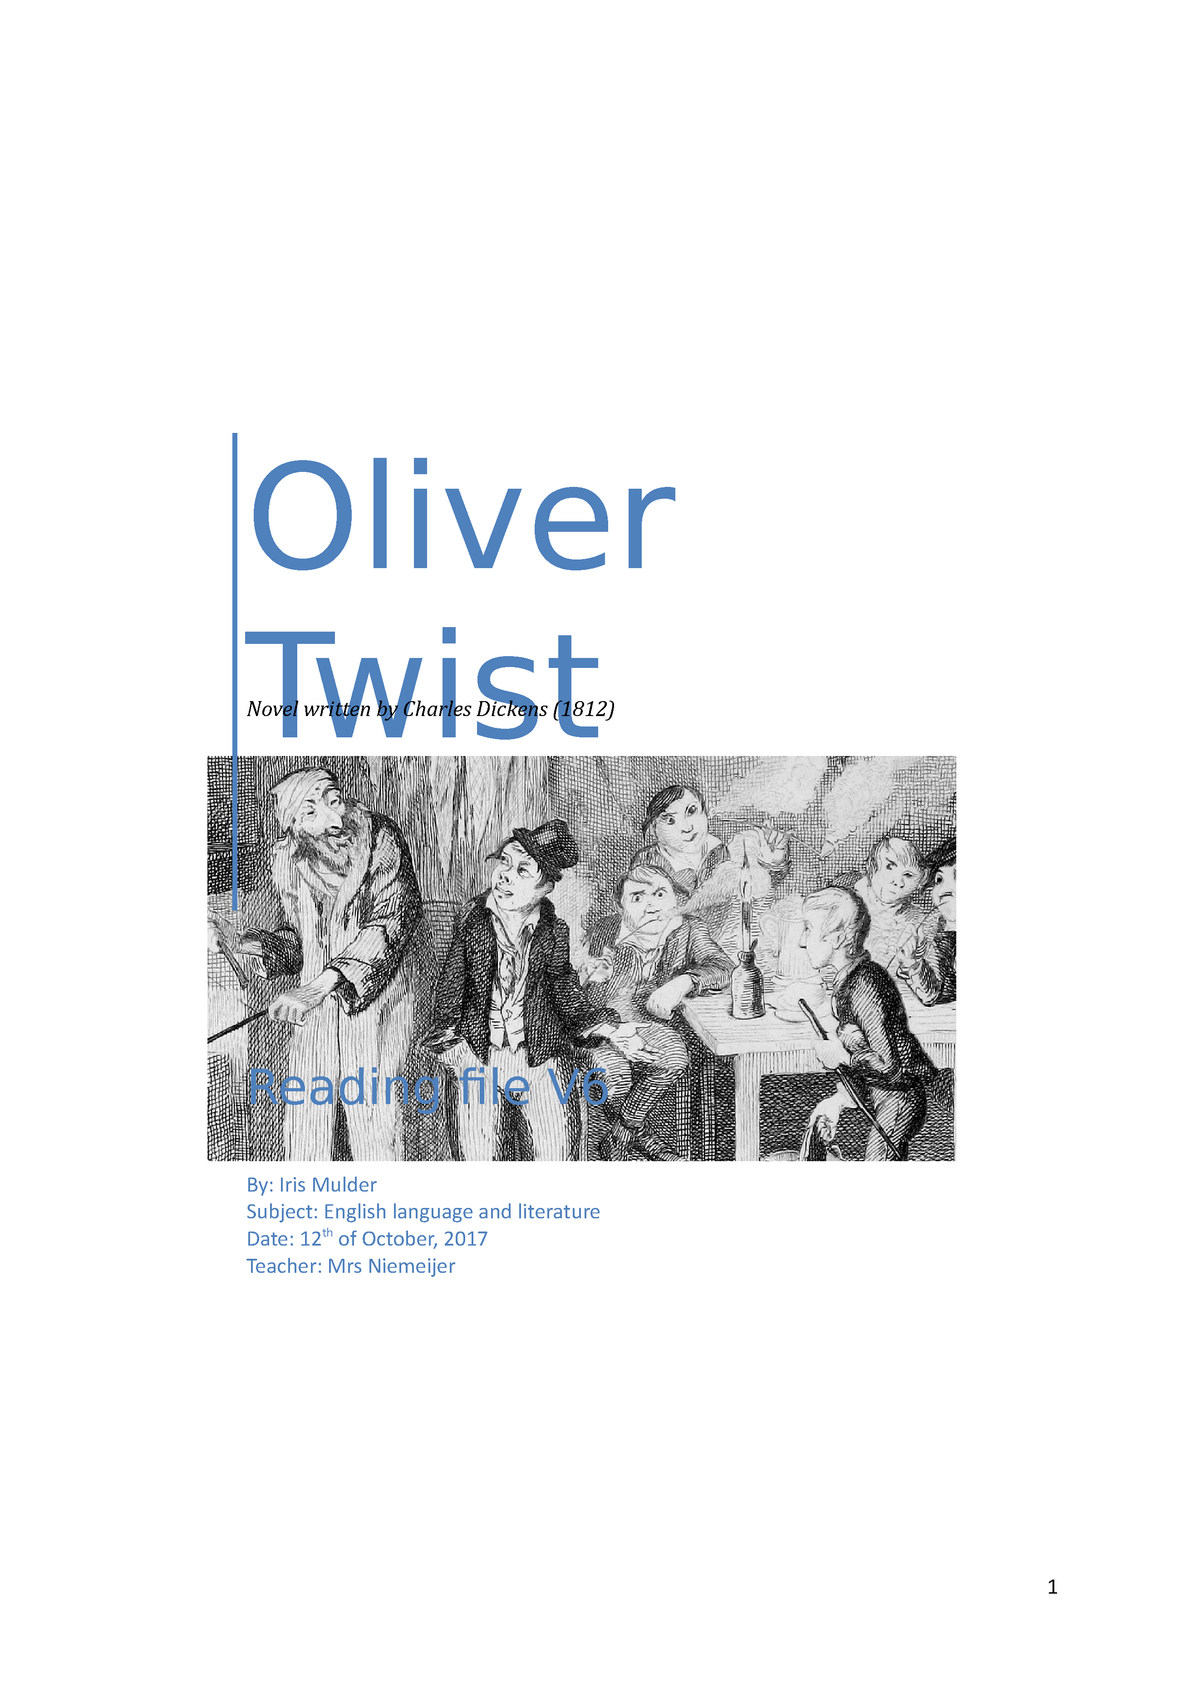 what is the main theme of oliver twist